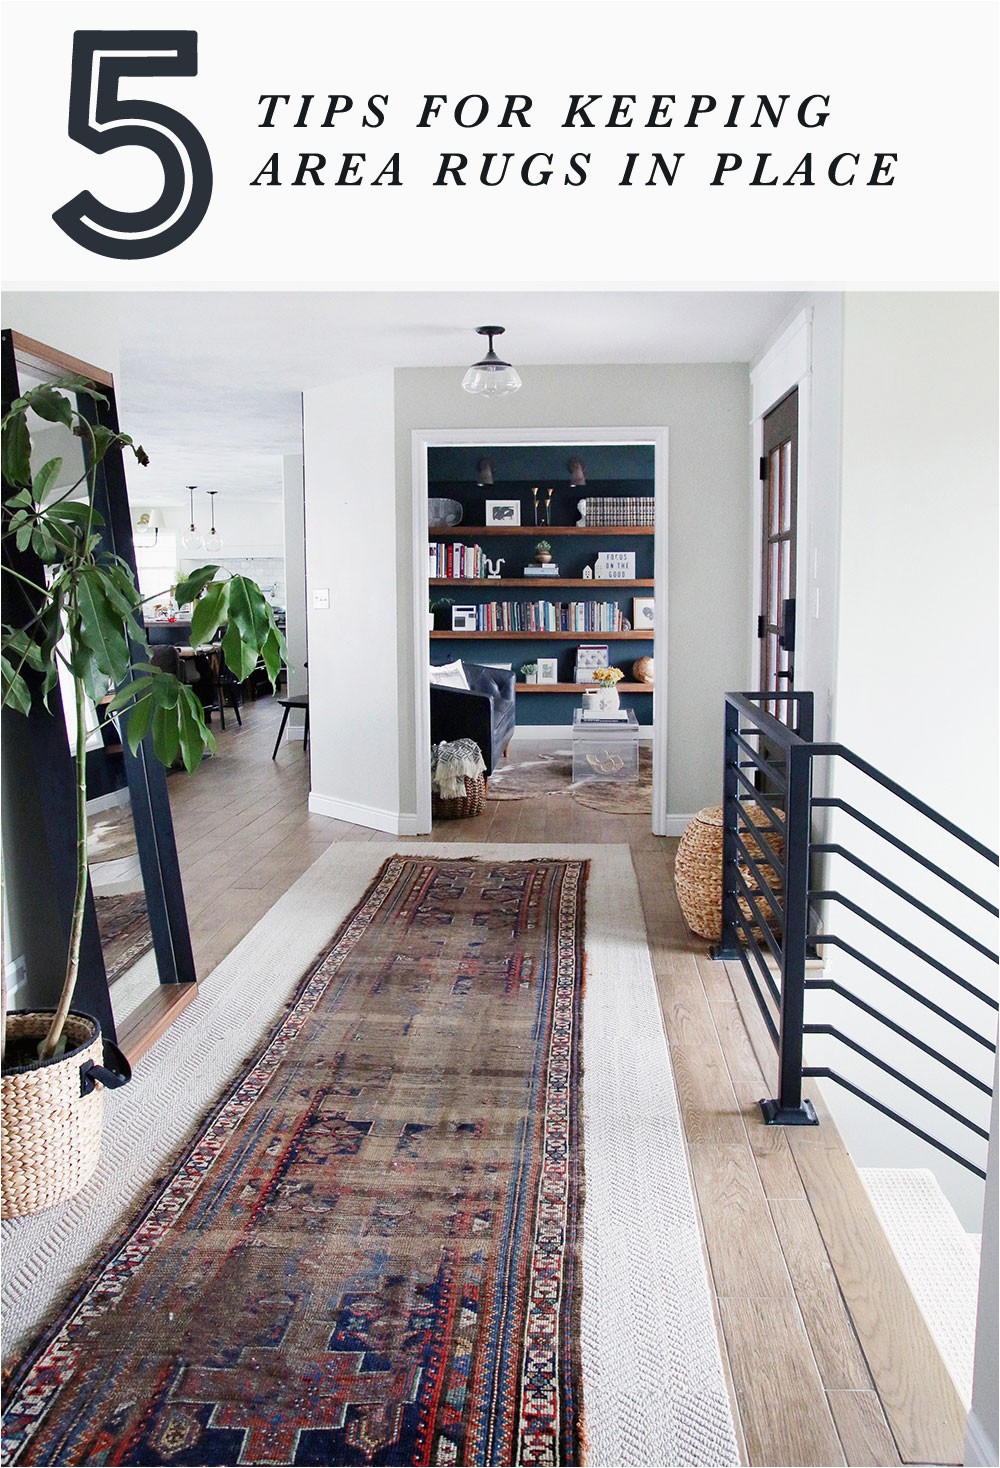 Putting area Rugs On top Of Carpet 5 Tips for Keeping area Rugs Exactly where You Want them